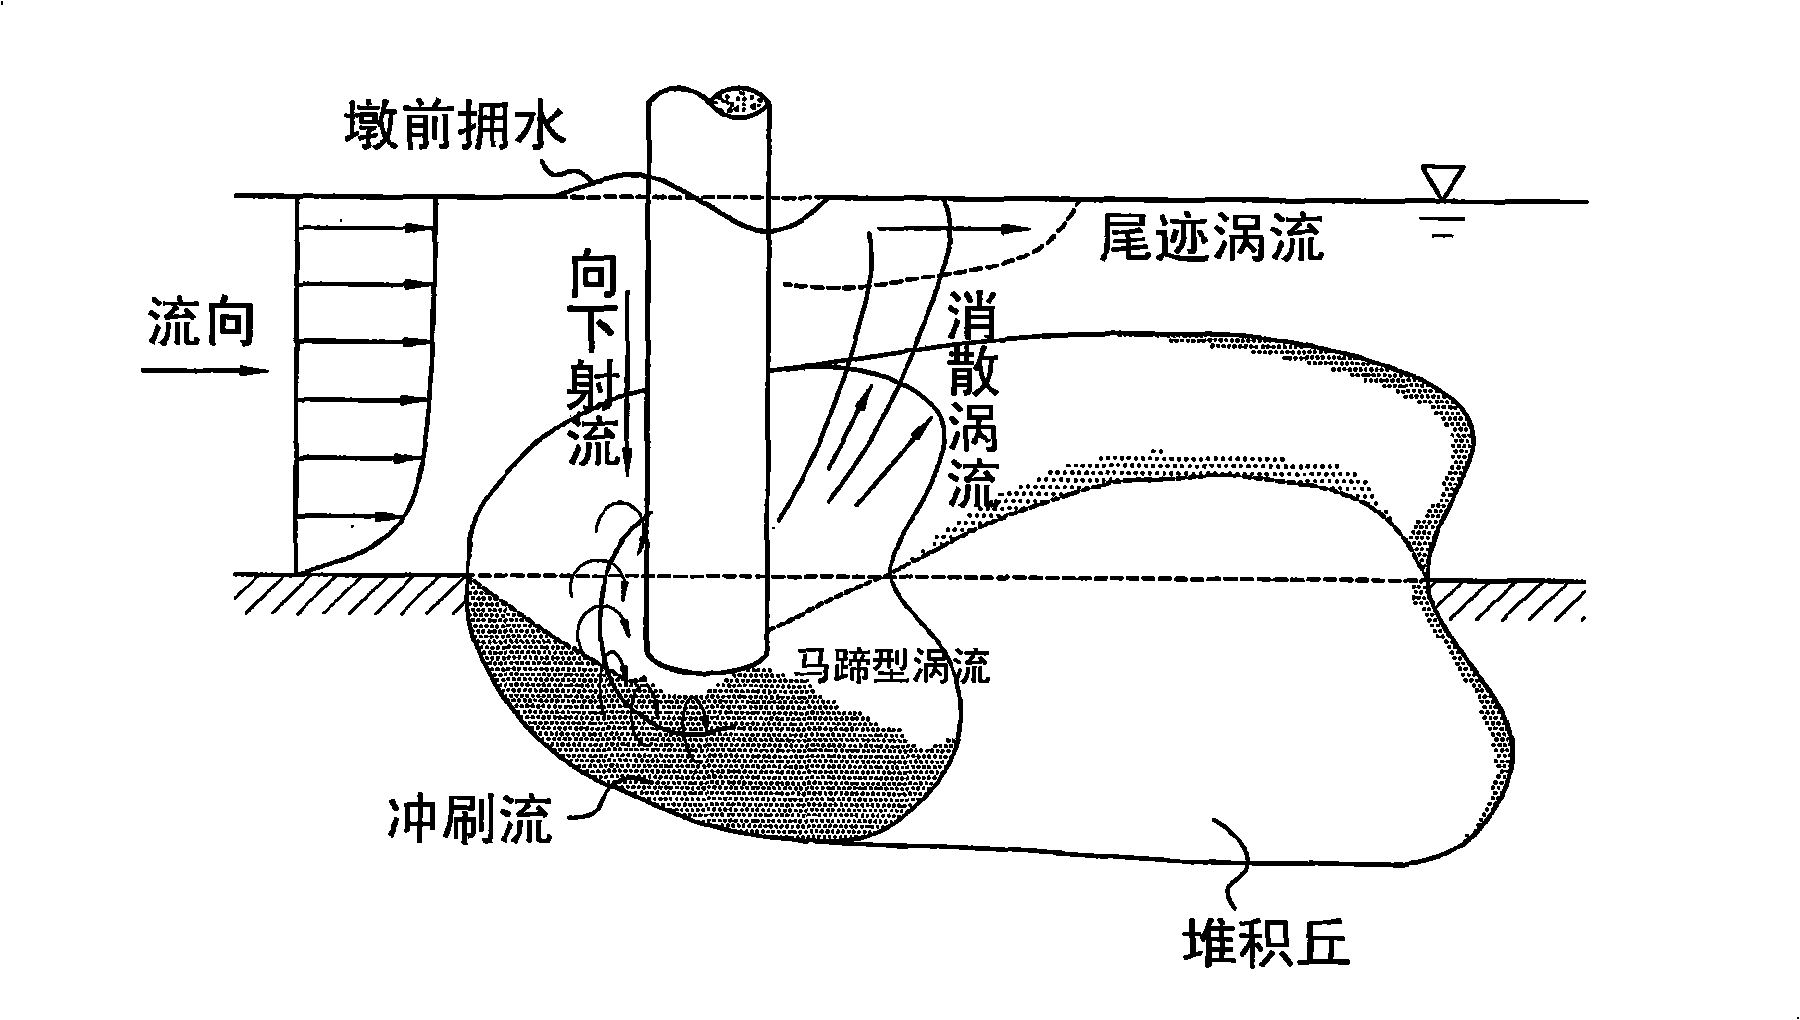 Monitoring device for monitoring river-bed scouring depth, remote automatic monitoring system and bridge